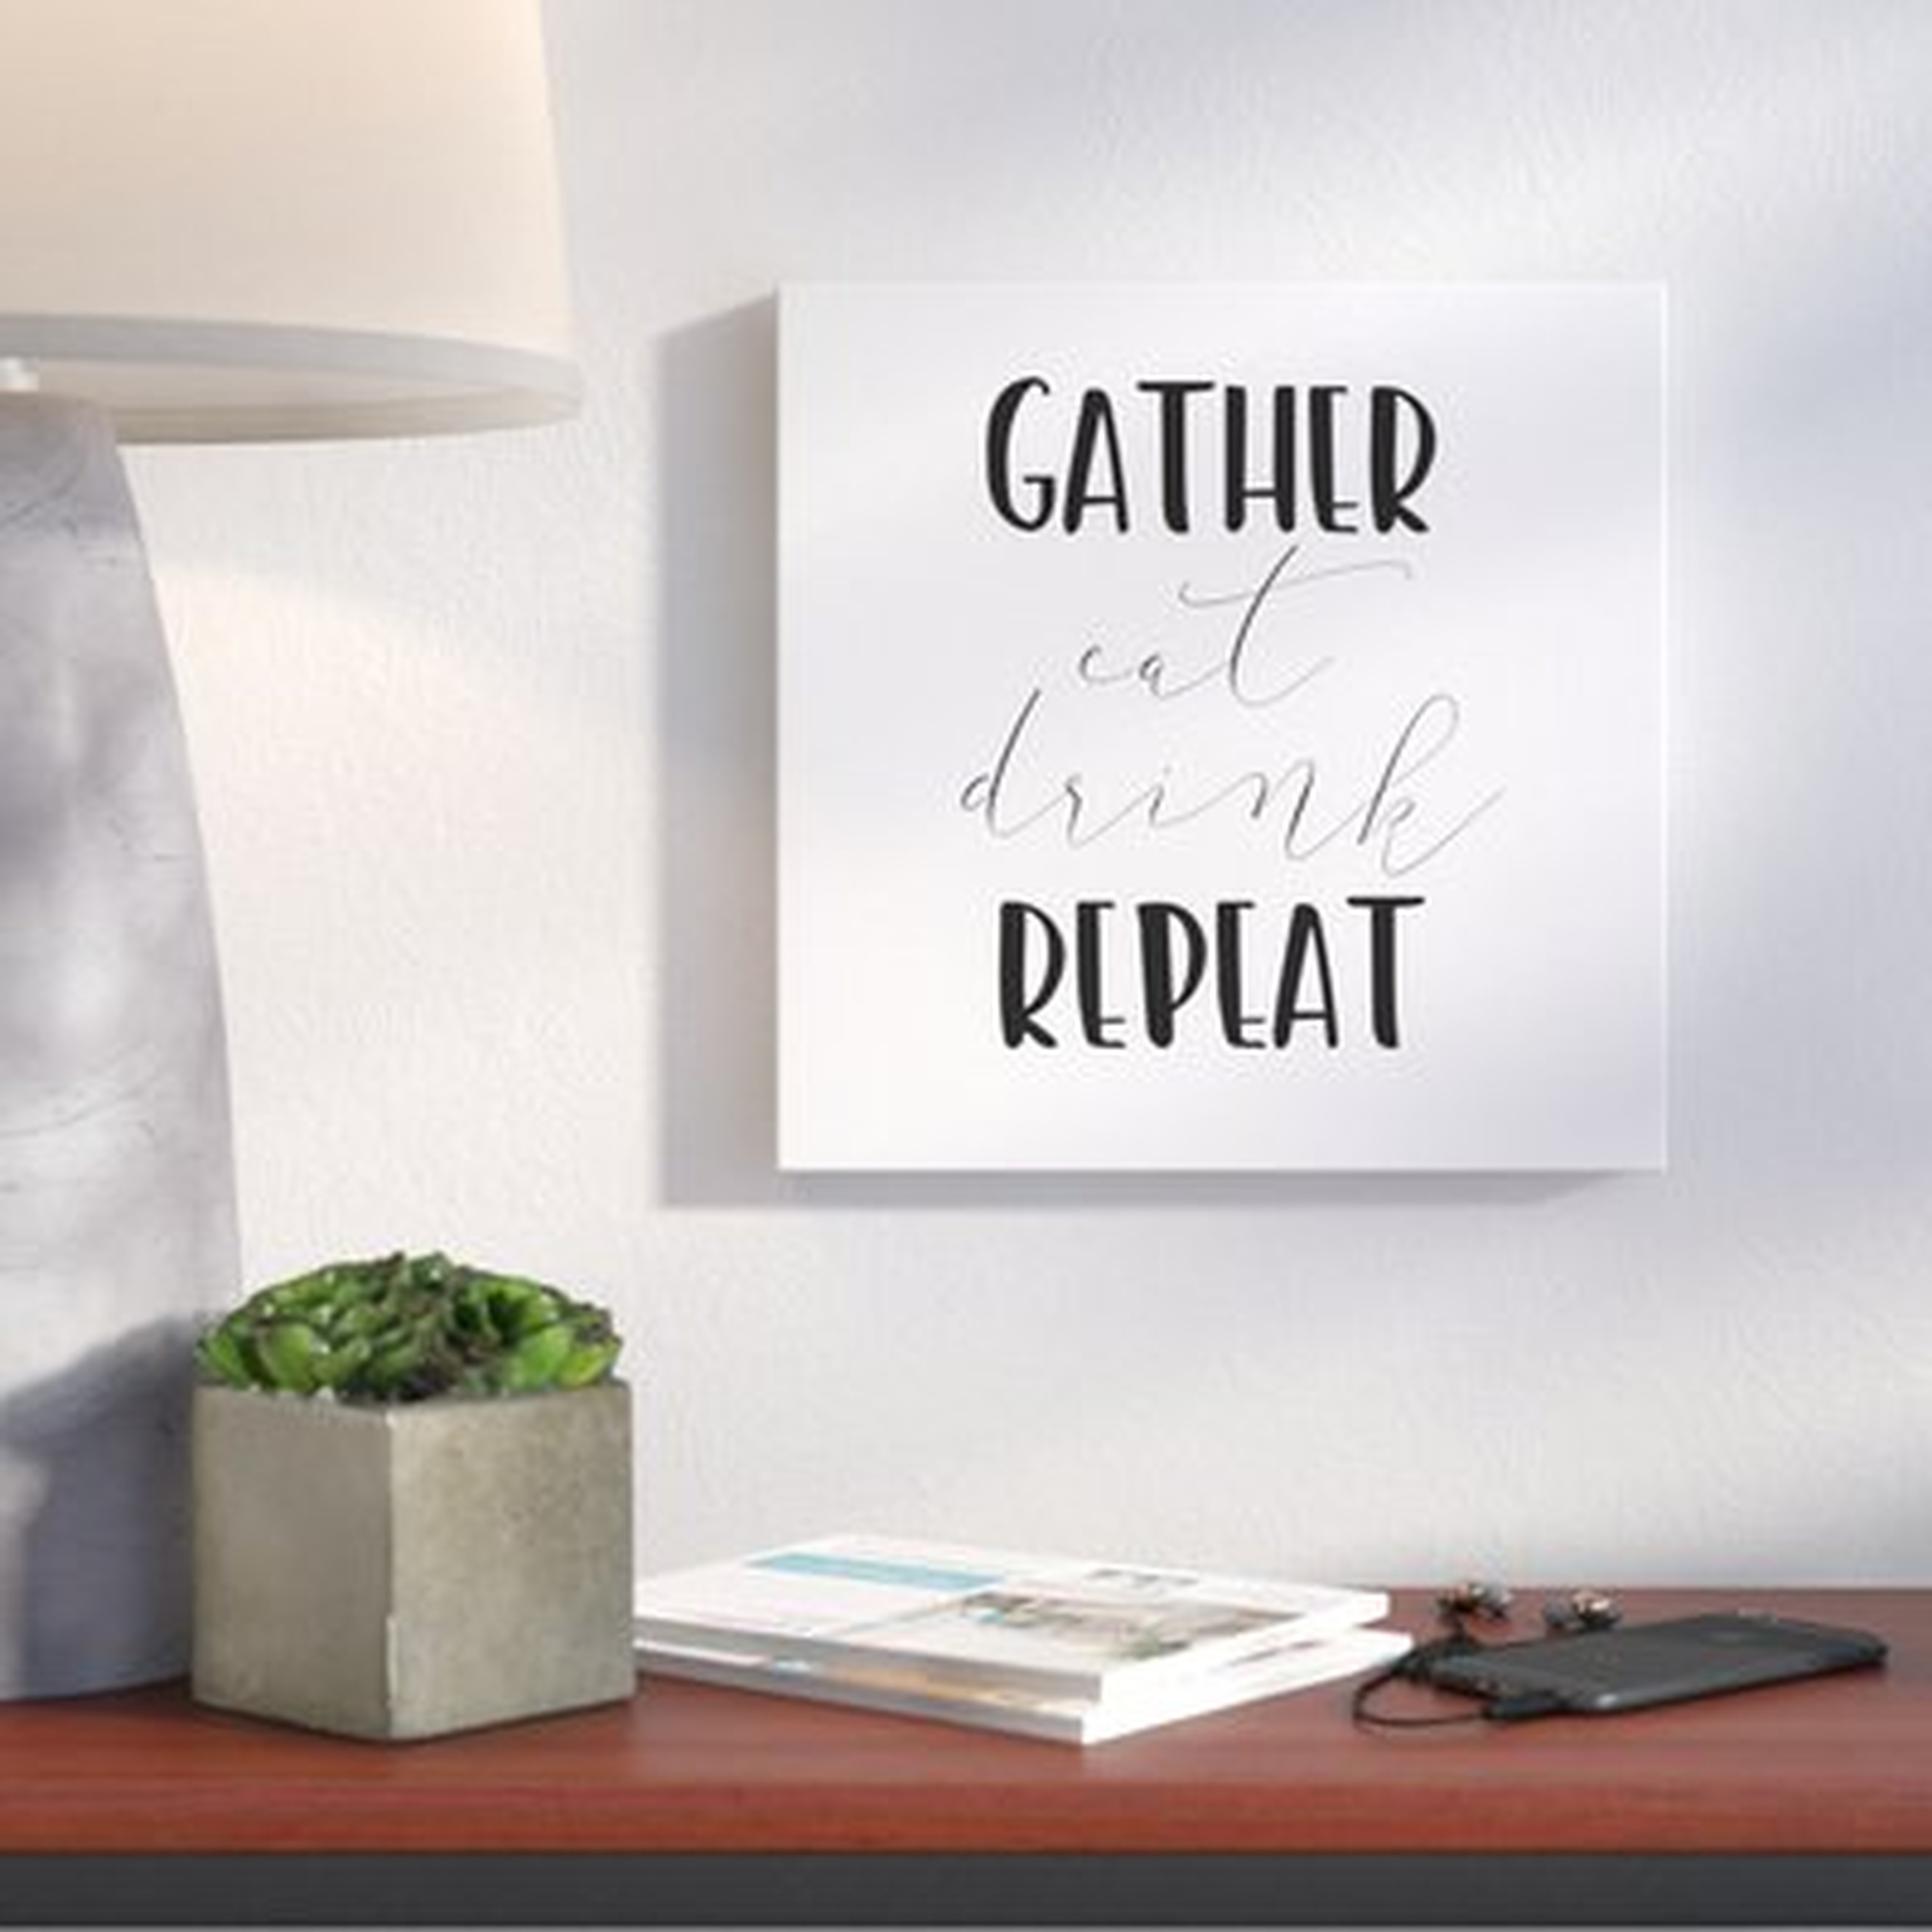 'Gather Eat Drink Repeat' Textual Art on Canvas - Wayfair